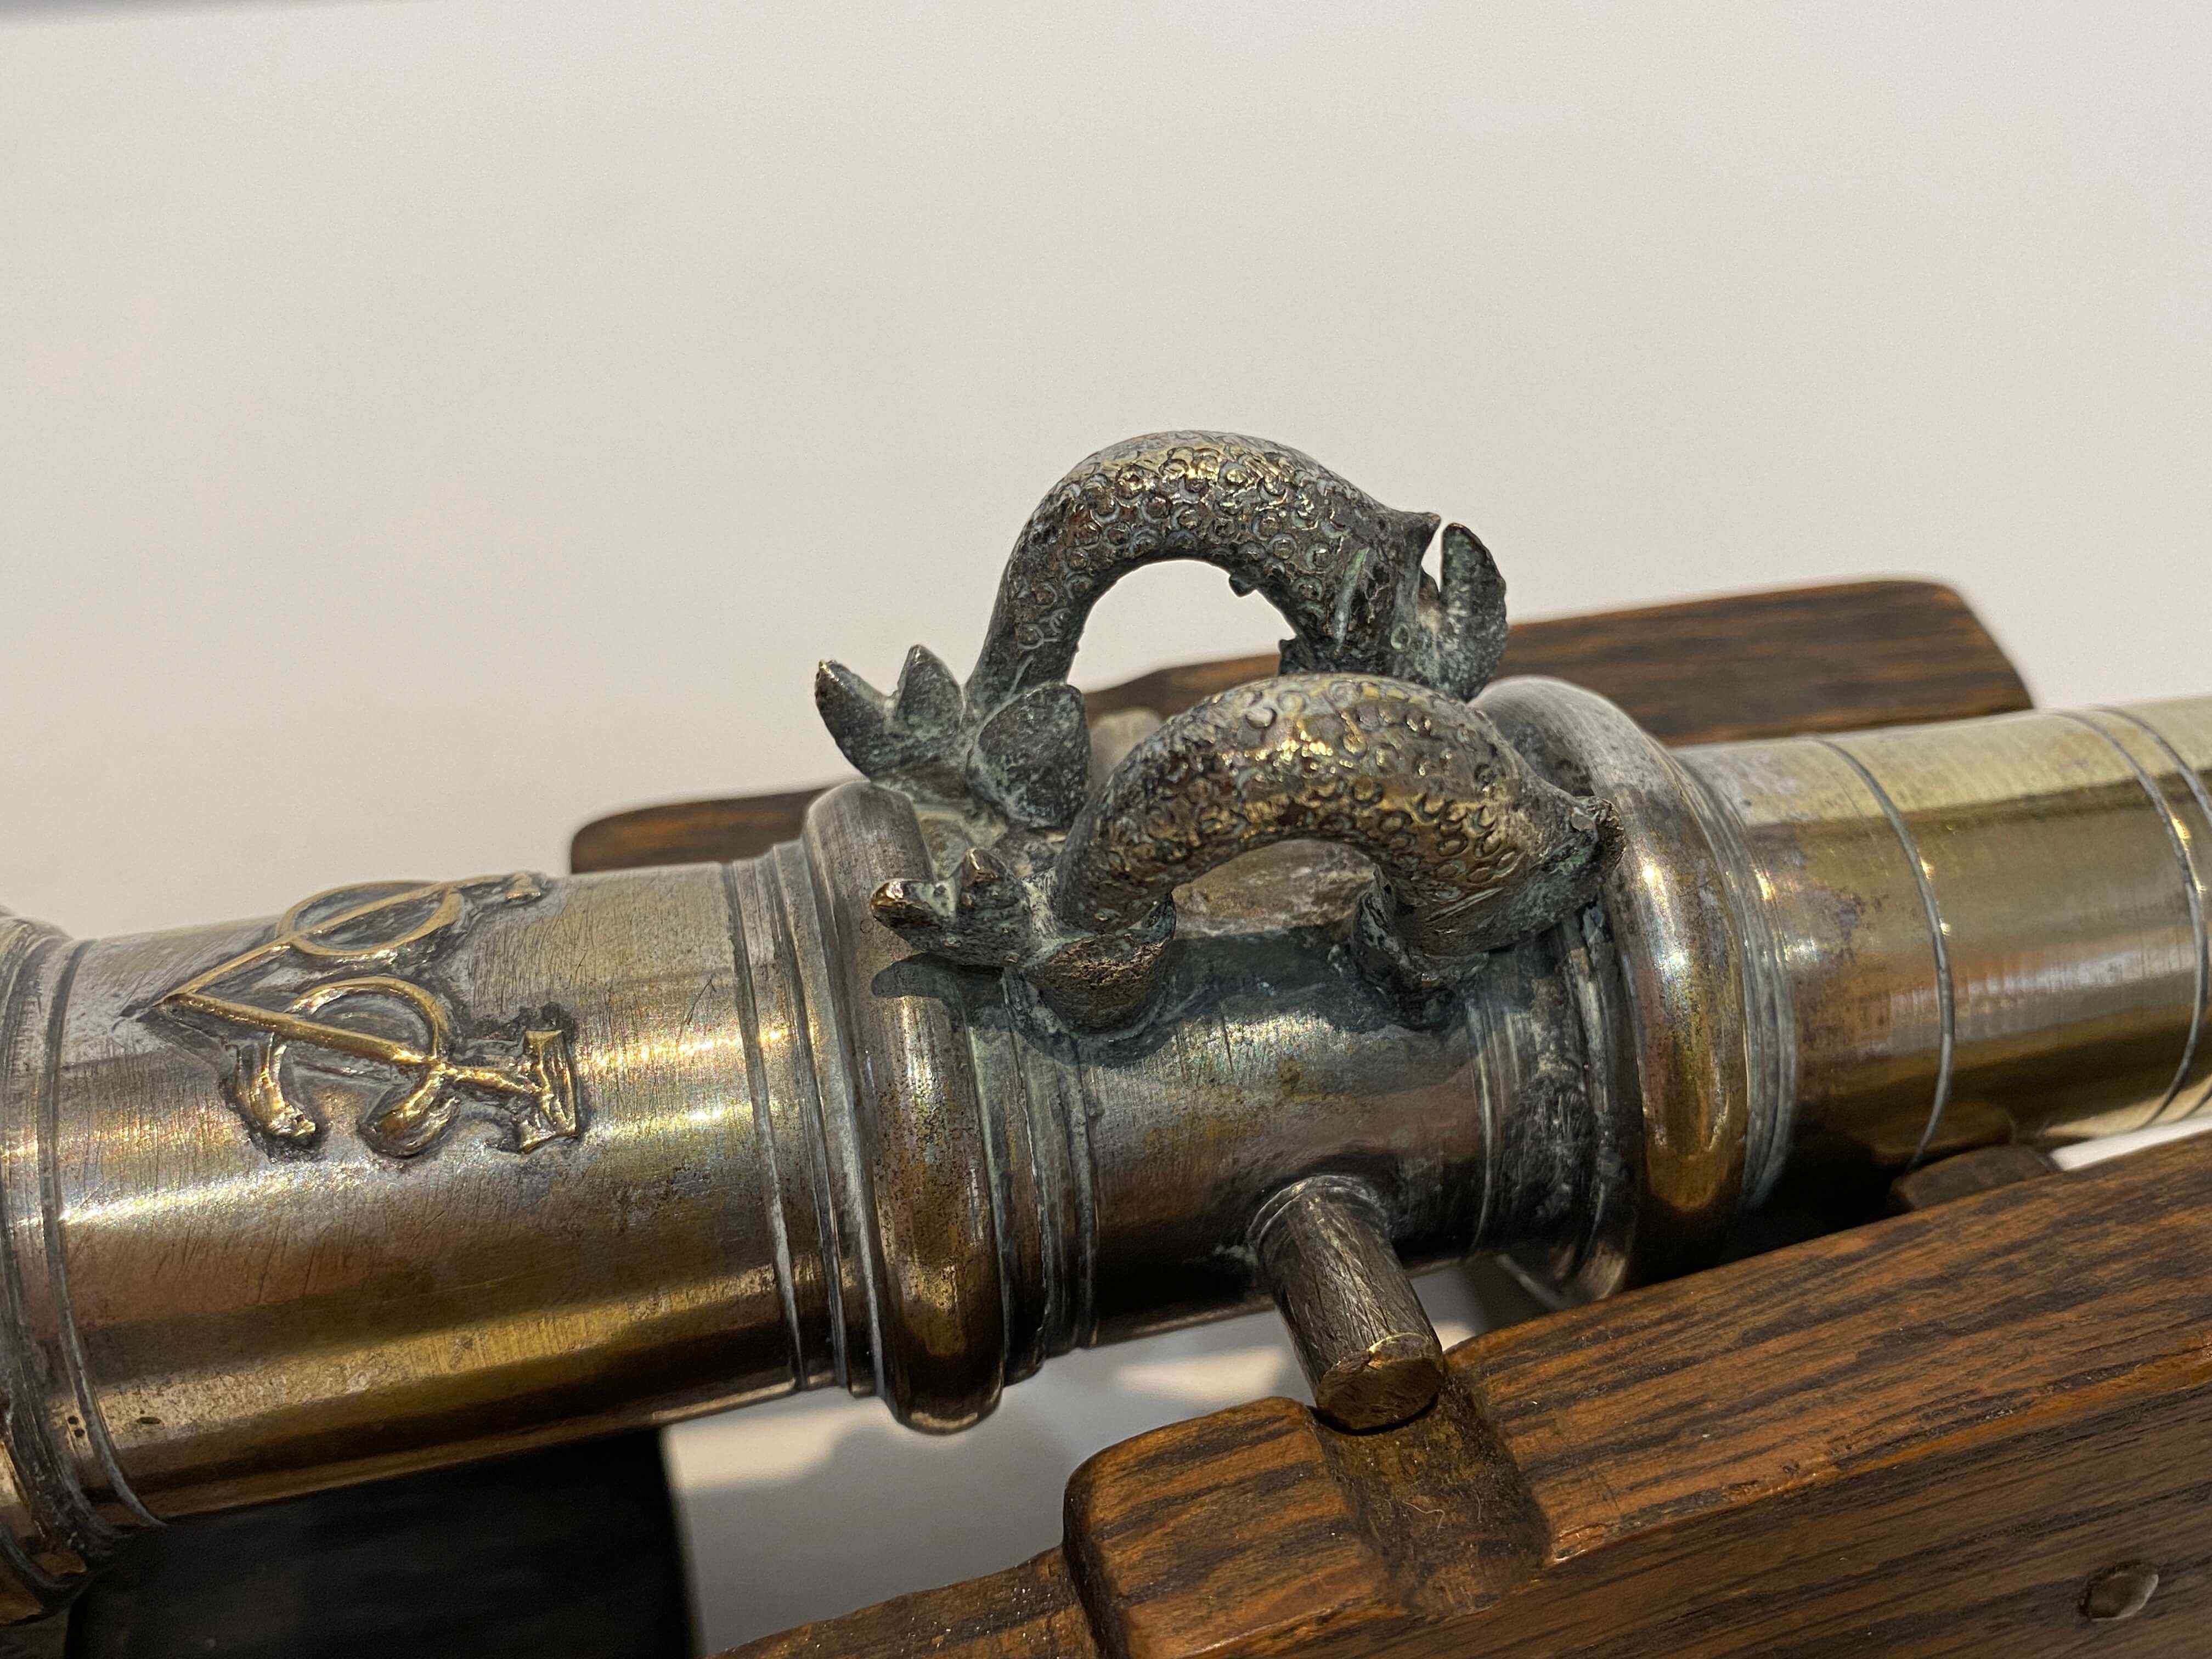 A miniature metal replica of a VOC cannon manufactured by Bill Pace, 20th century